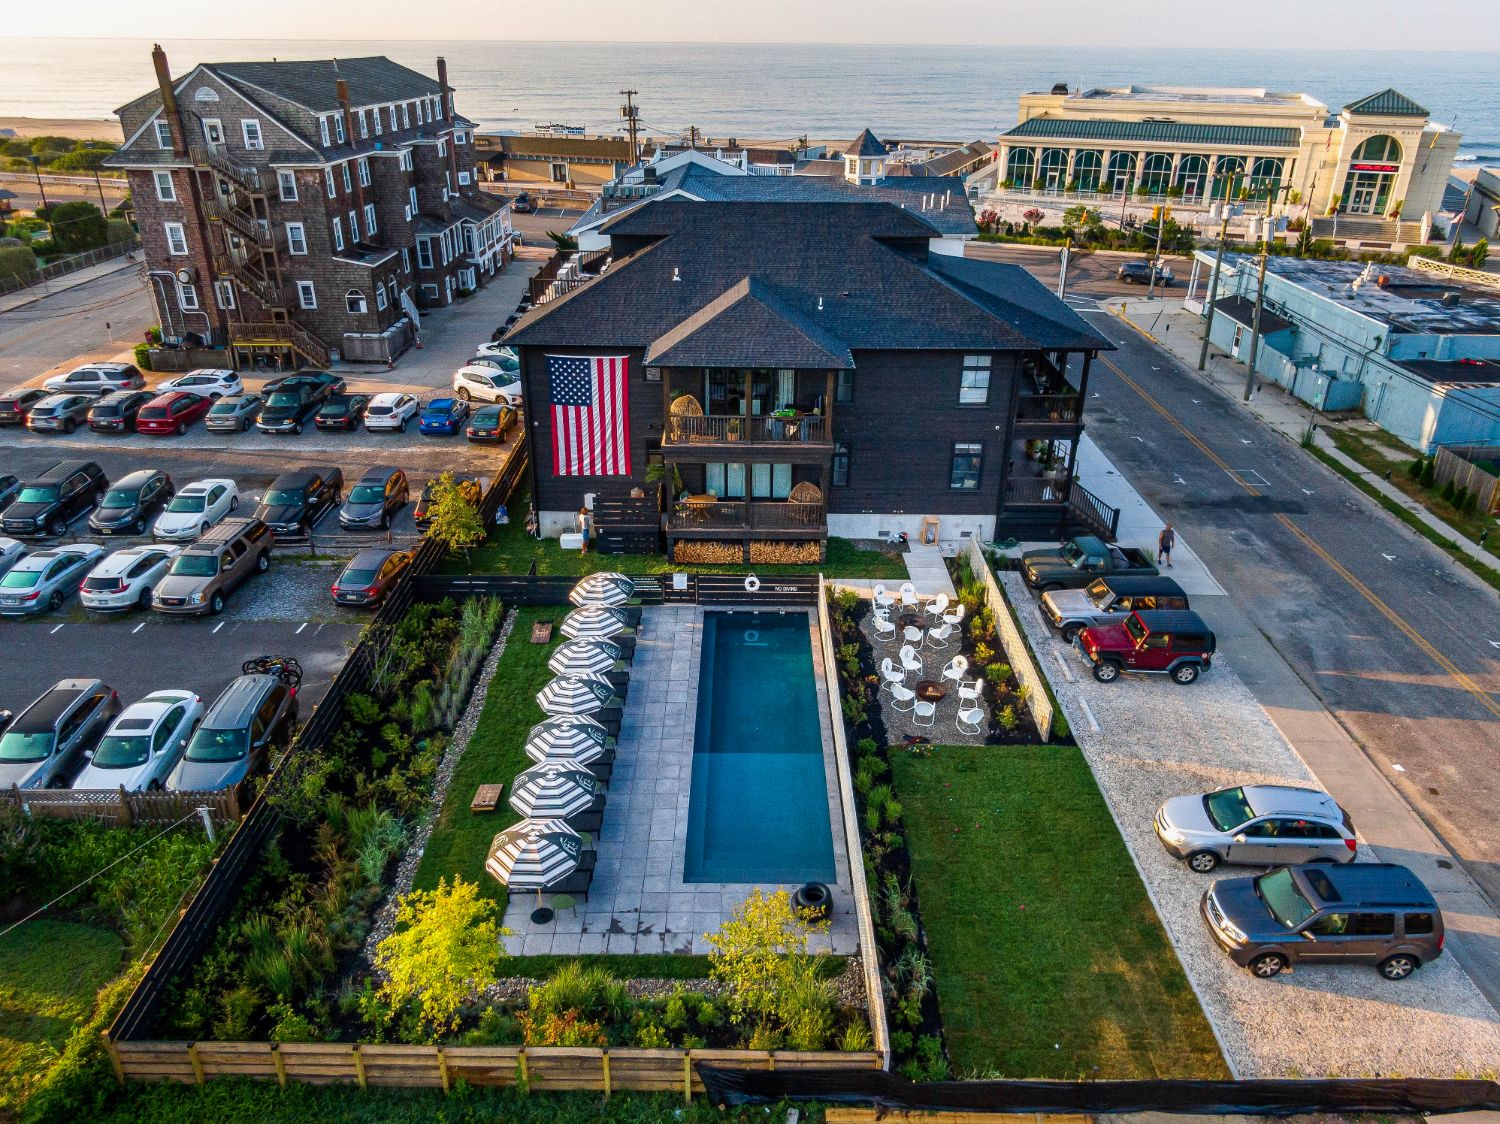 Lokal Hotel in Cape May from above with landscaped pool at bottom and ocean in background